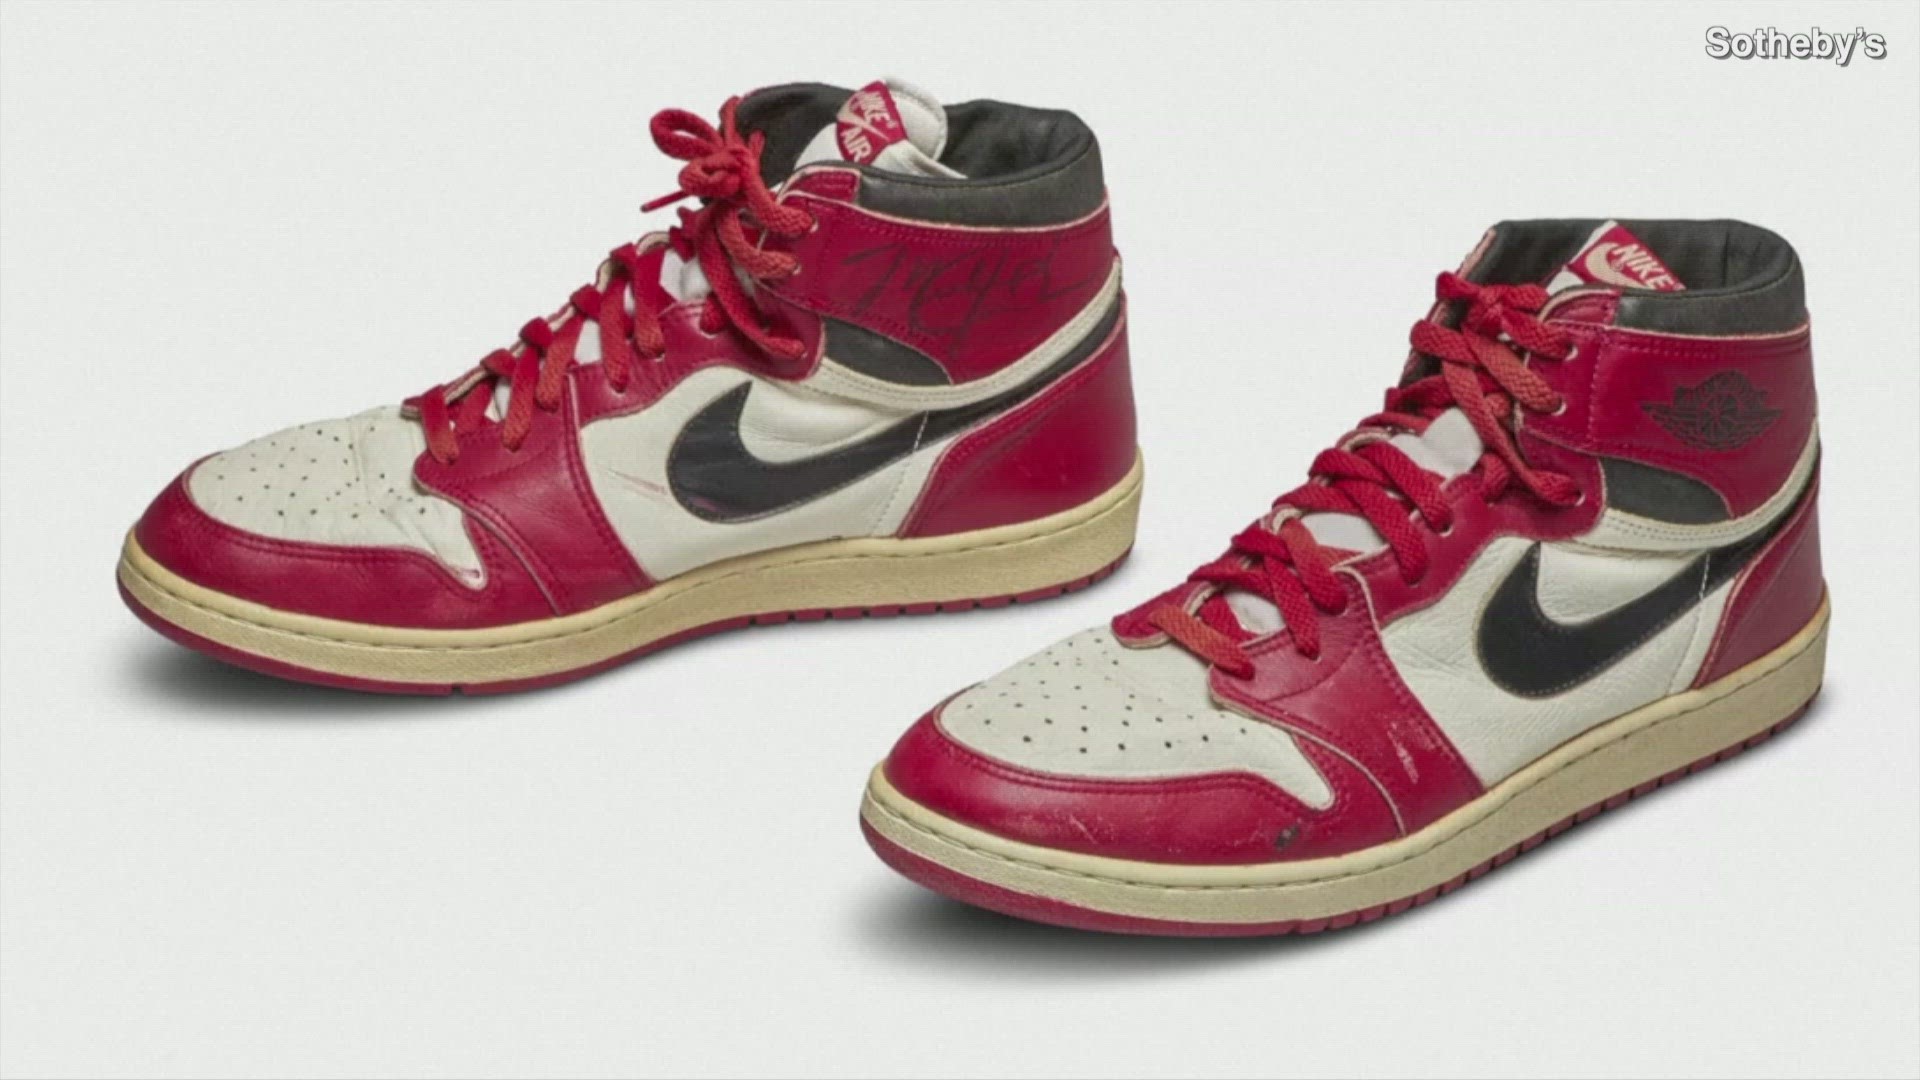 One of the most famous pairs of sneakers worn by one of the most famous athletes sold for over half a million dollars. Veuer's Justin Kircher has the story.